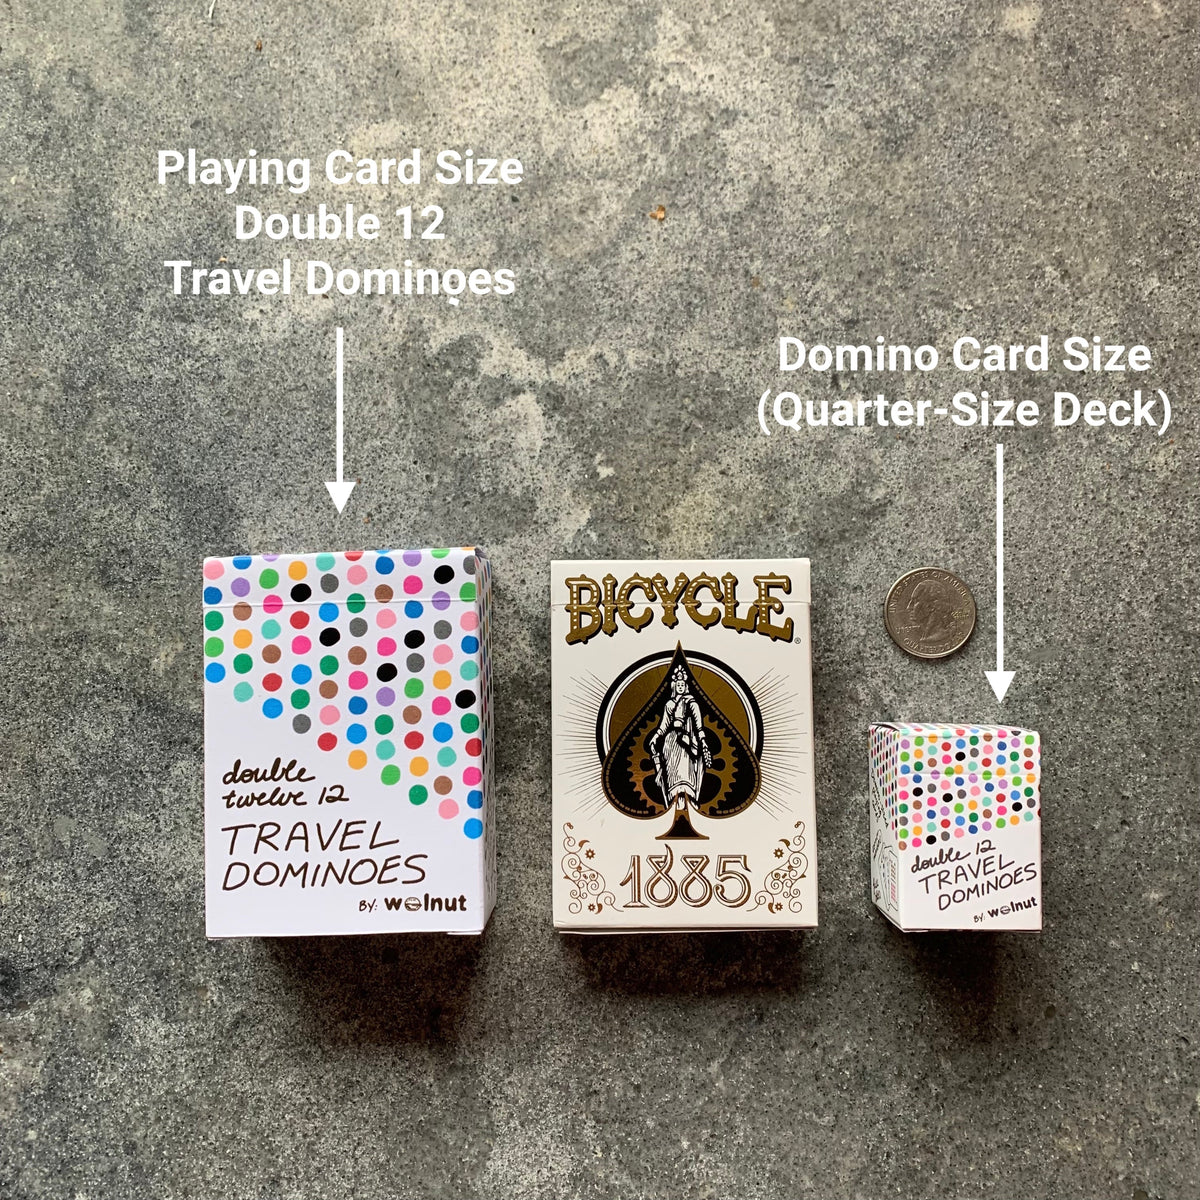 Comparative photo with a quarter for scale. Double 12 travel domino playing cards in playing card size and domino card size. 